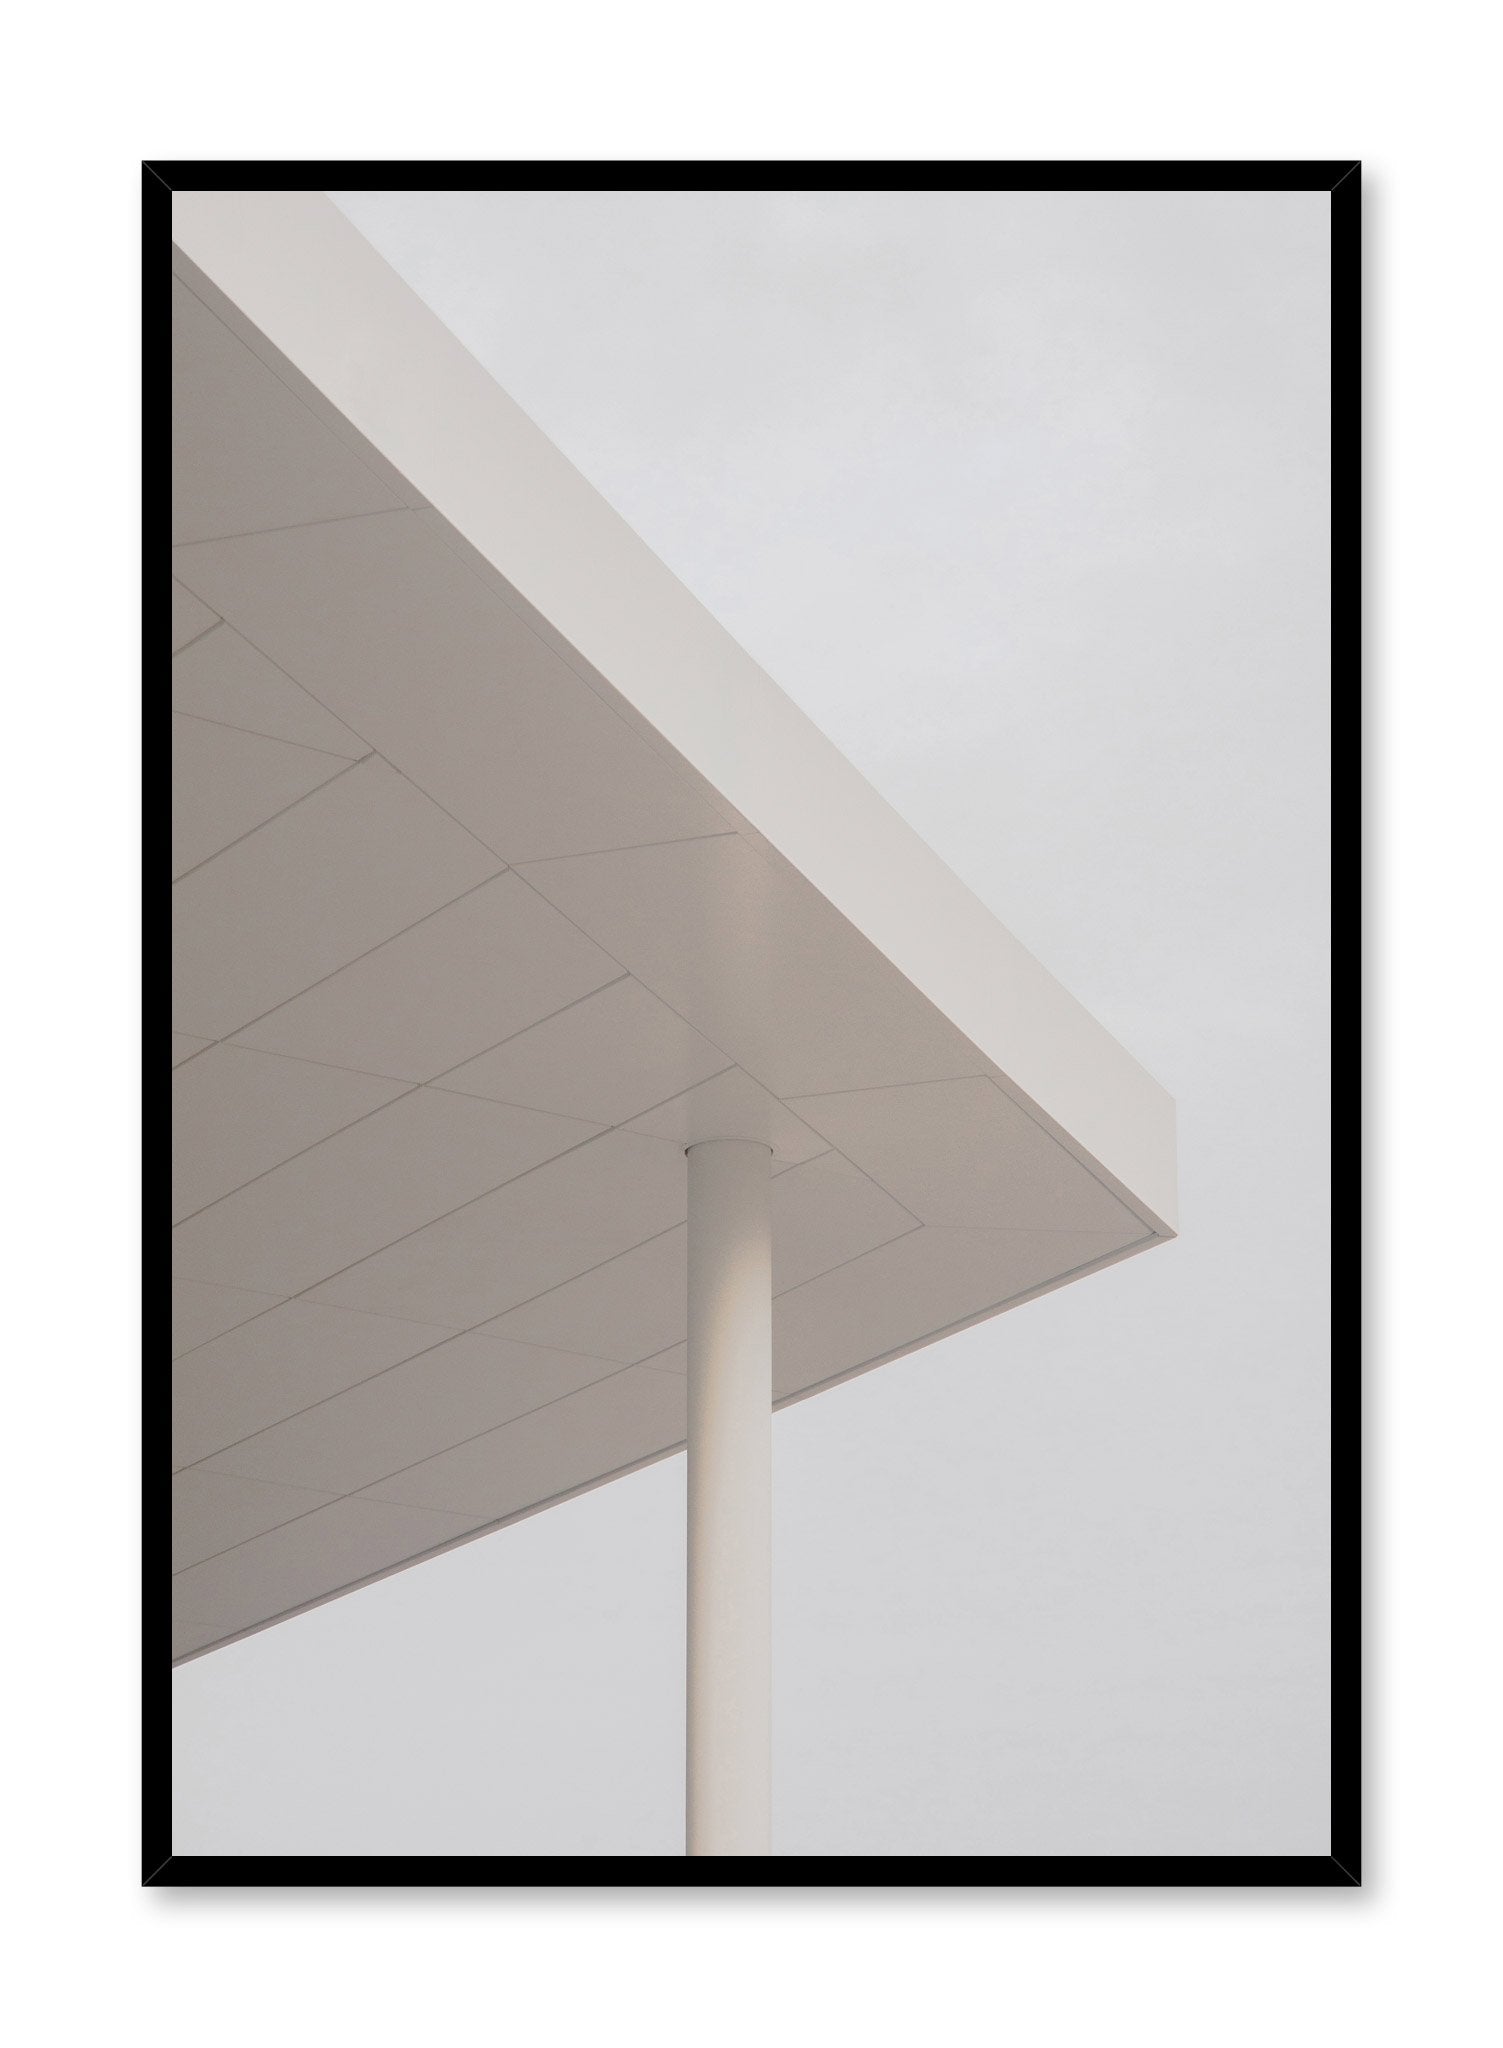 Modern minimalist poster by Opposite Wall with photography of corner of building